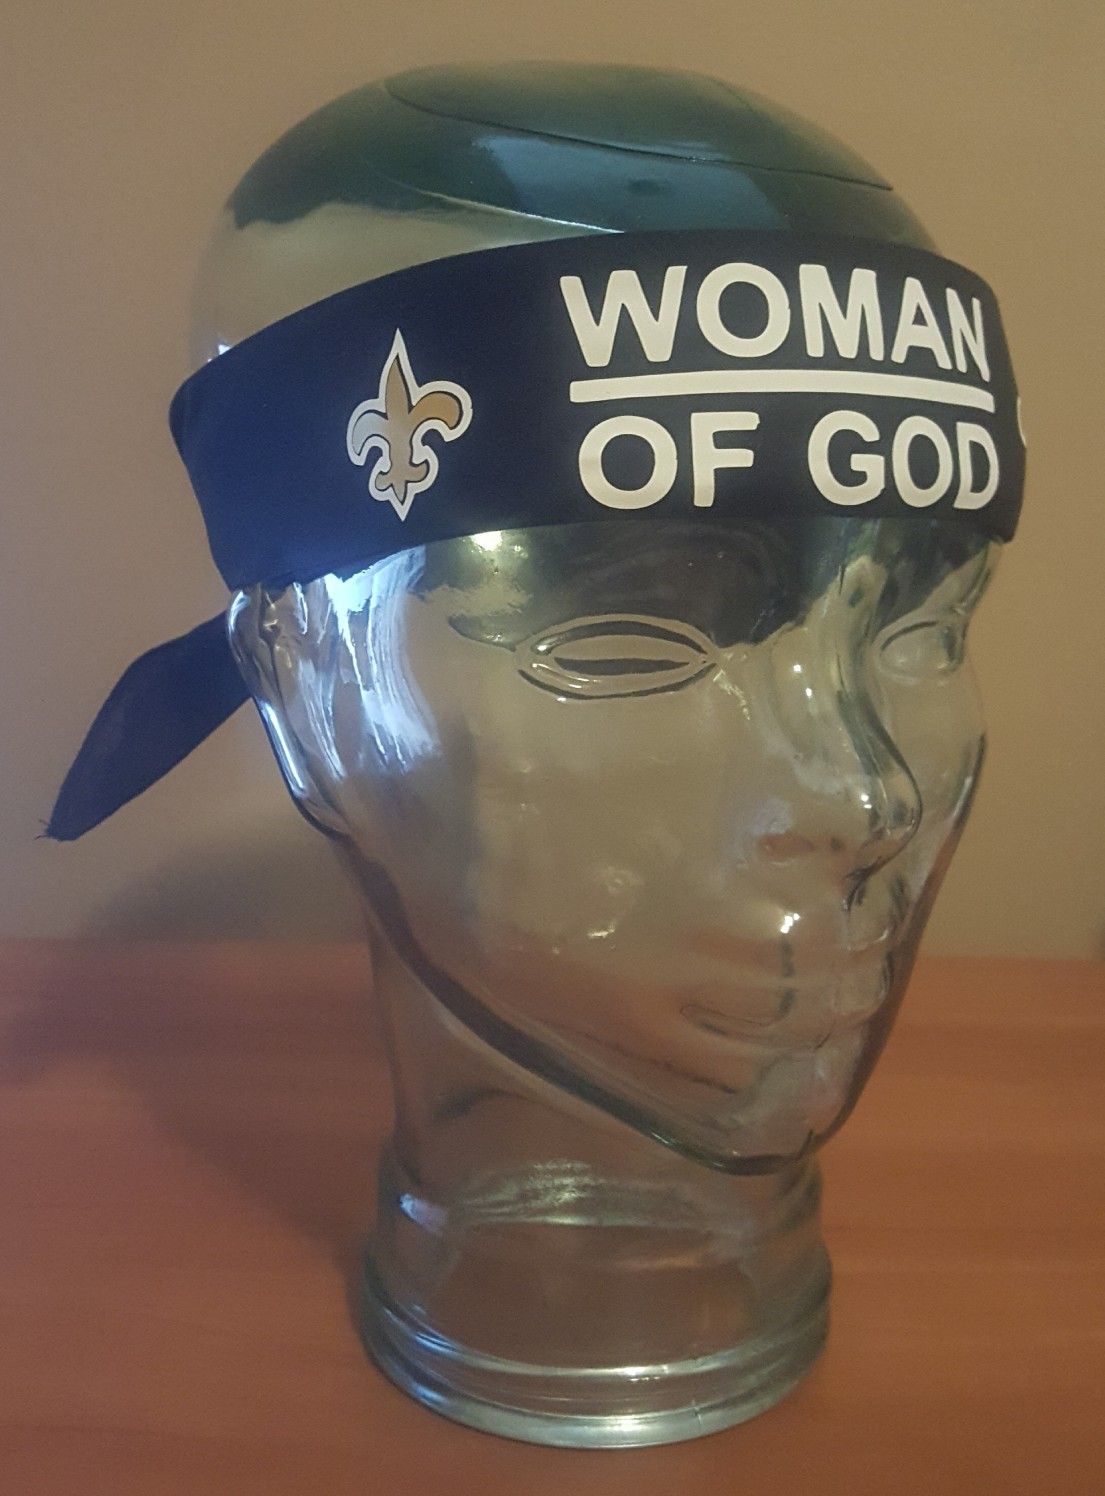 New Orleans Saints Woman of God Bandana For Sale Man of God. New shipped to anywhere in the U.S. PayPal, Cash App